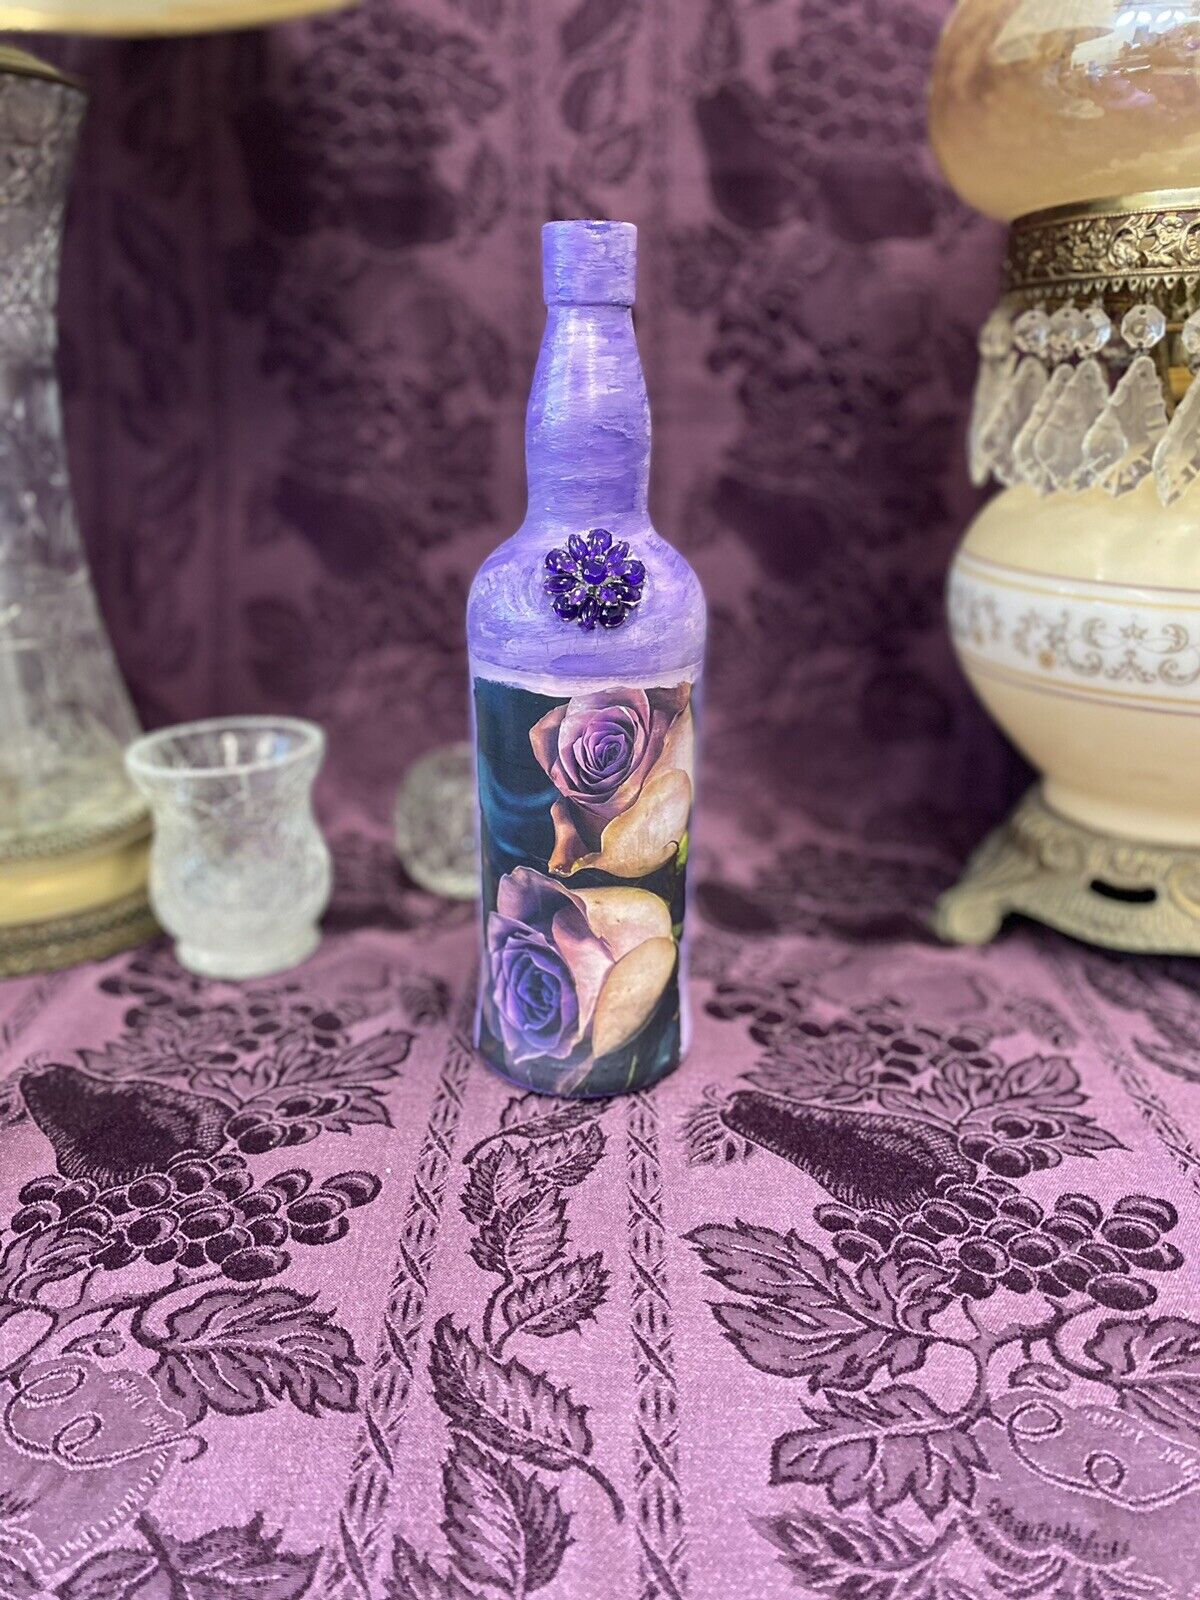 Decorative Wine Bottle Stained Glass Hand Painted Upcycled Purple Lavender Roses Decorative Bottle Stylin’ Spirit   